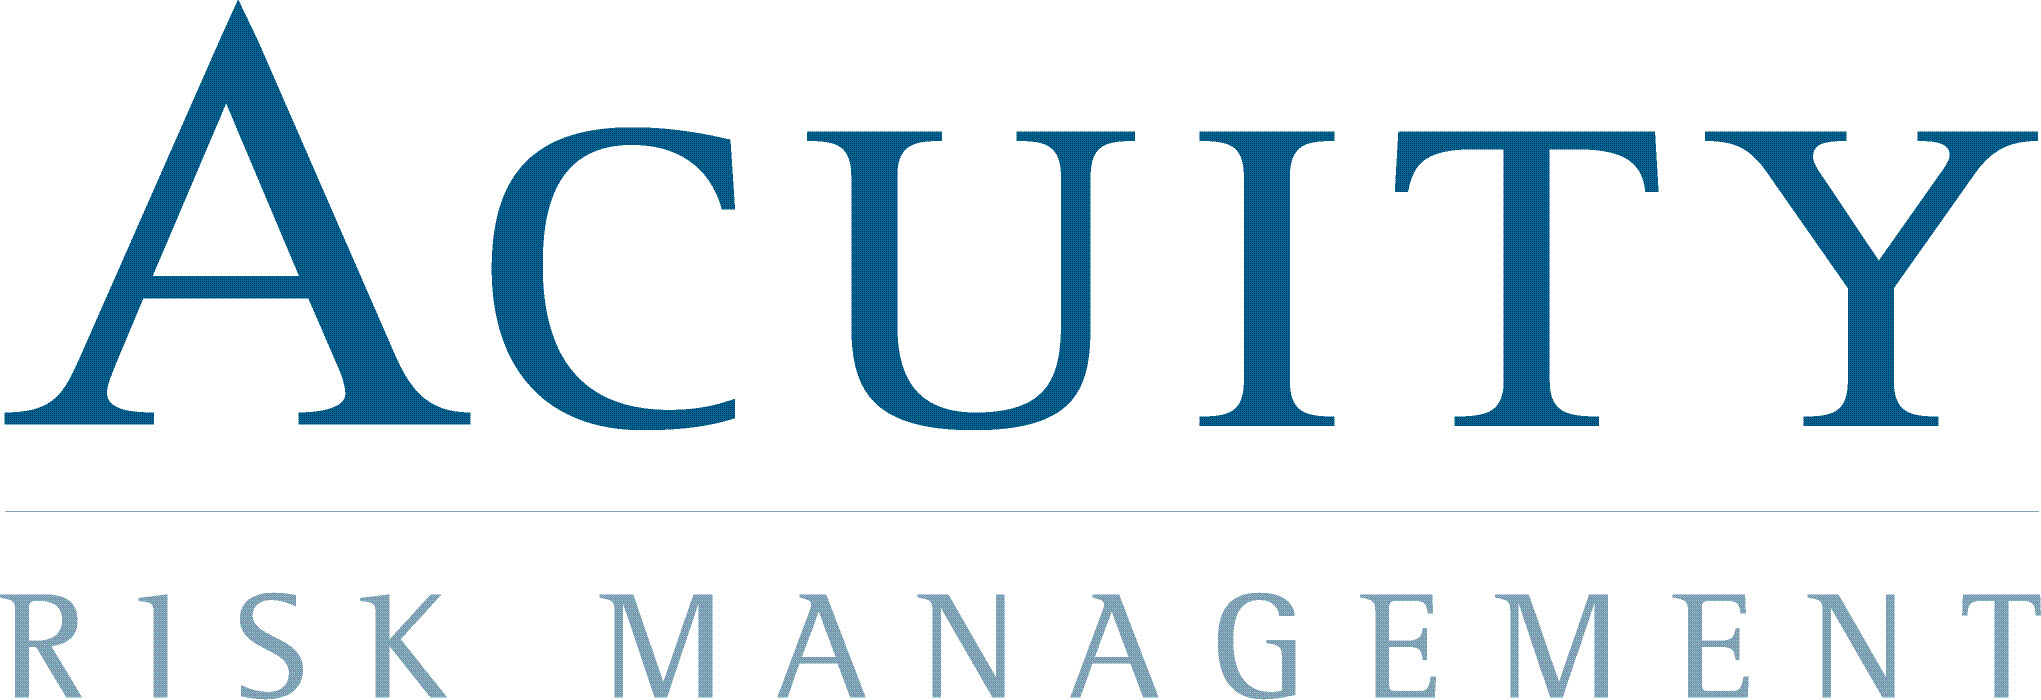 Cyber Risk Innovator Acuity Announces IRM event to support organizations with risk management evaluation challenges